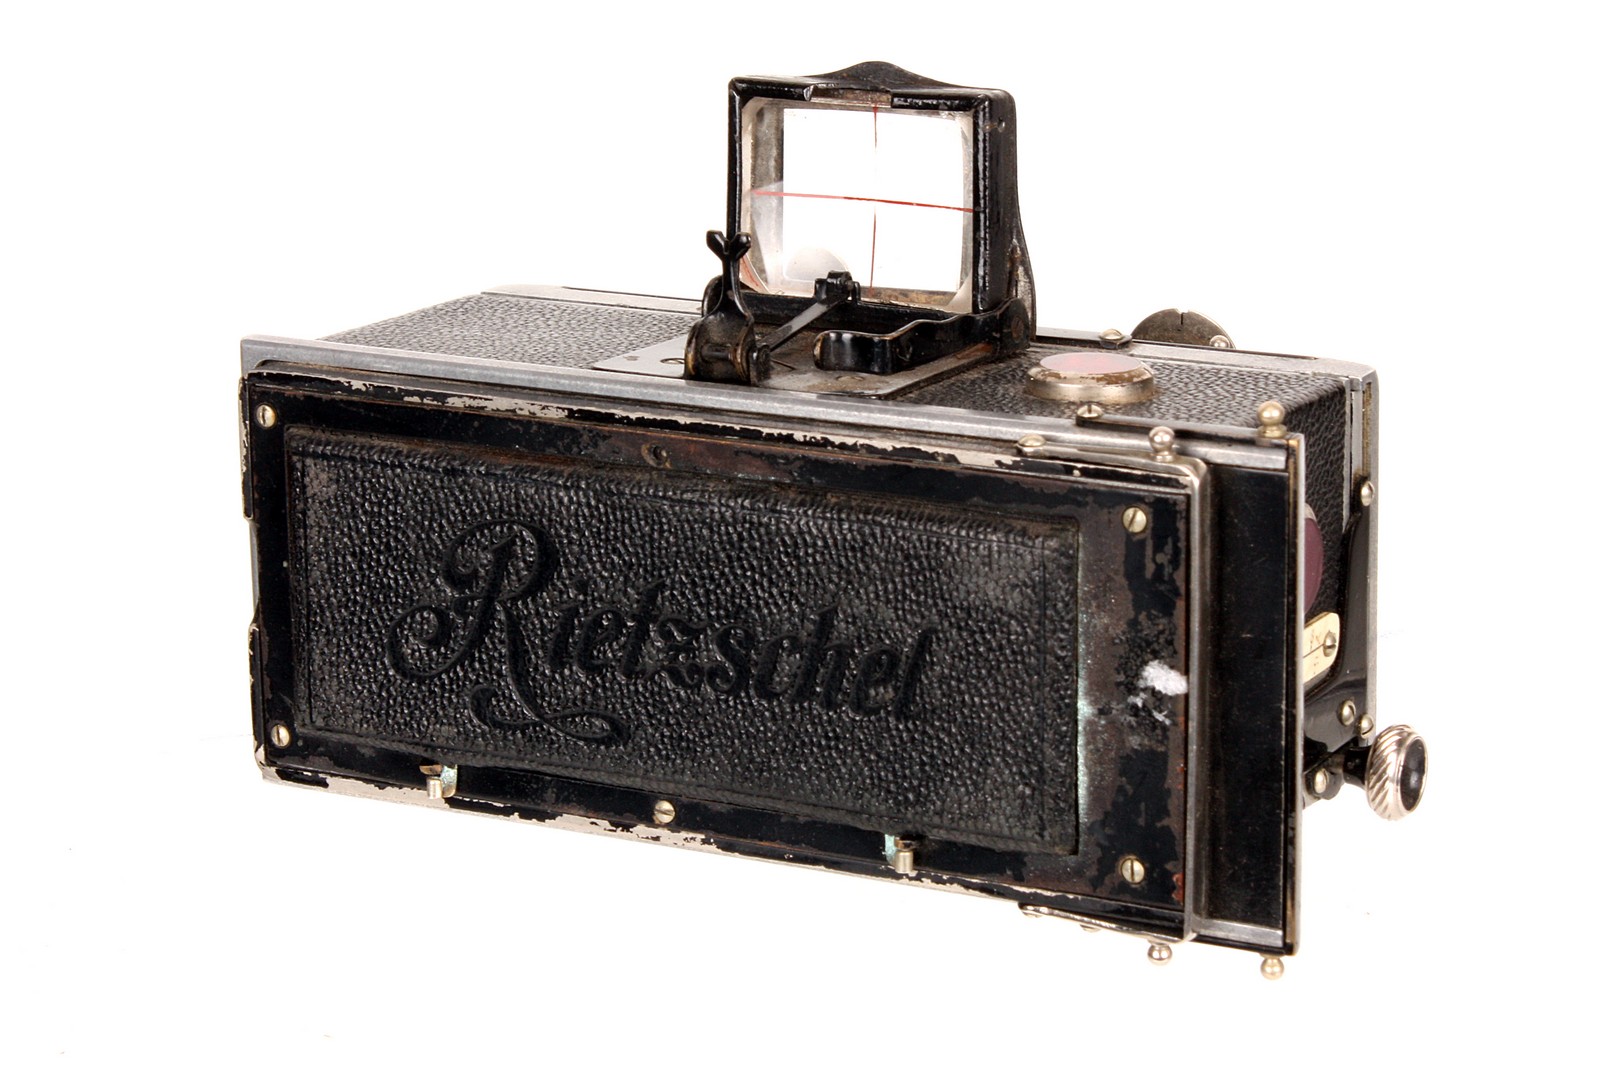 A Rietzschel Kosmo Clack Stereo Camera, 44x107mm, with Rietzschel Linear Anastigmat A000 f/4.5 - Image 2 of 2